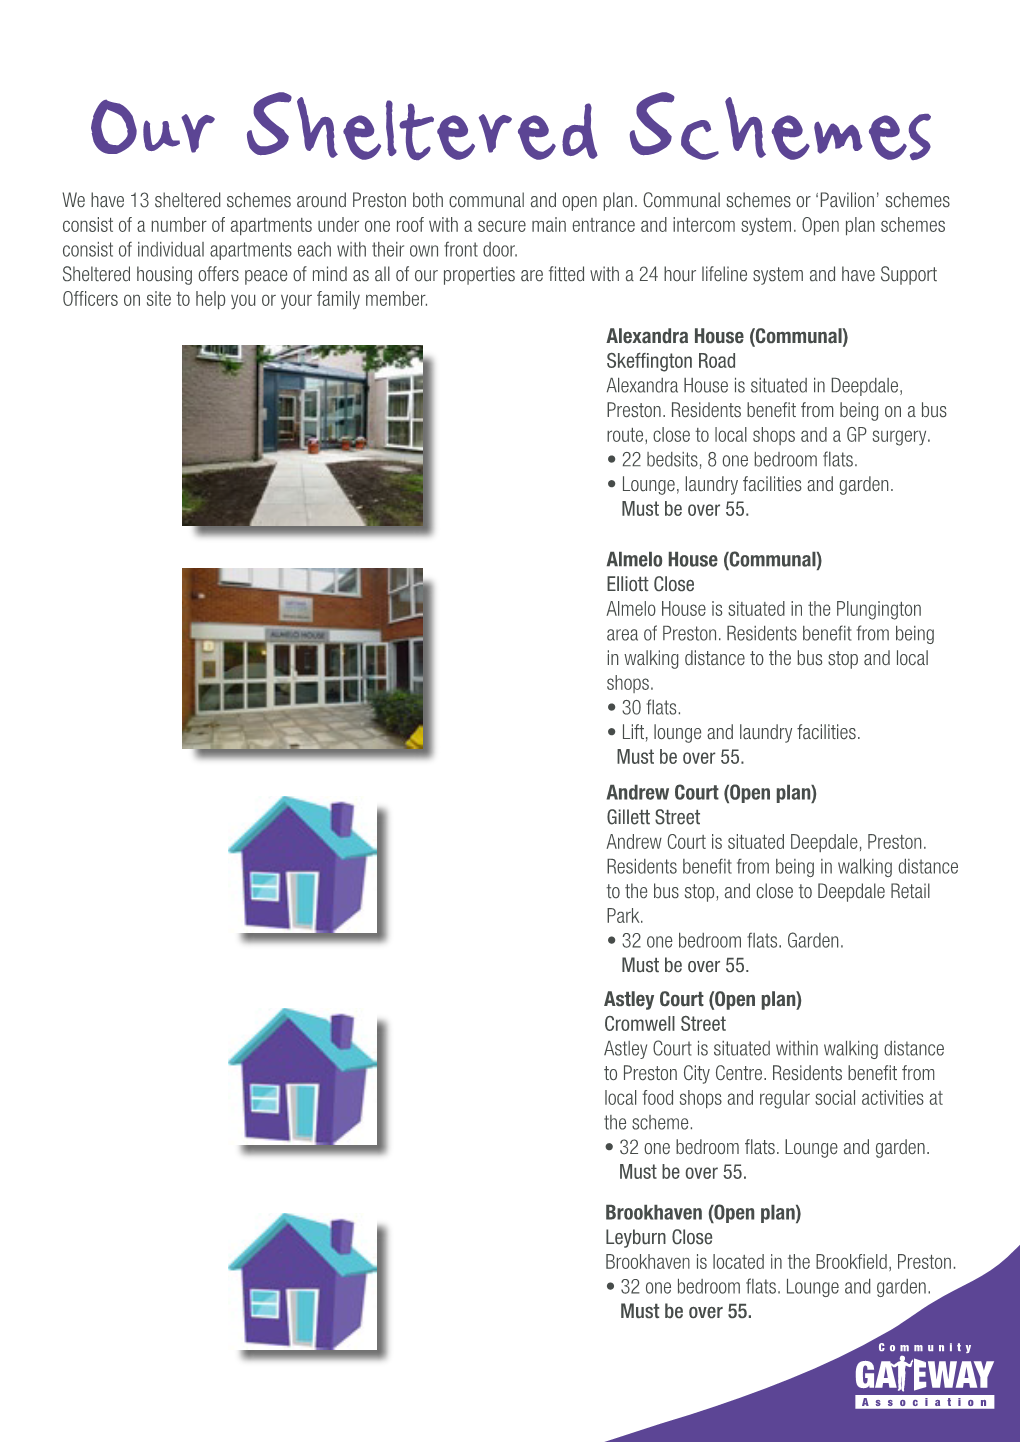 Our Sheltered Schemes We Have 13 Sheltered Schemes Around Preston Both Communal and Open Plan